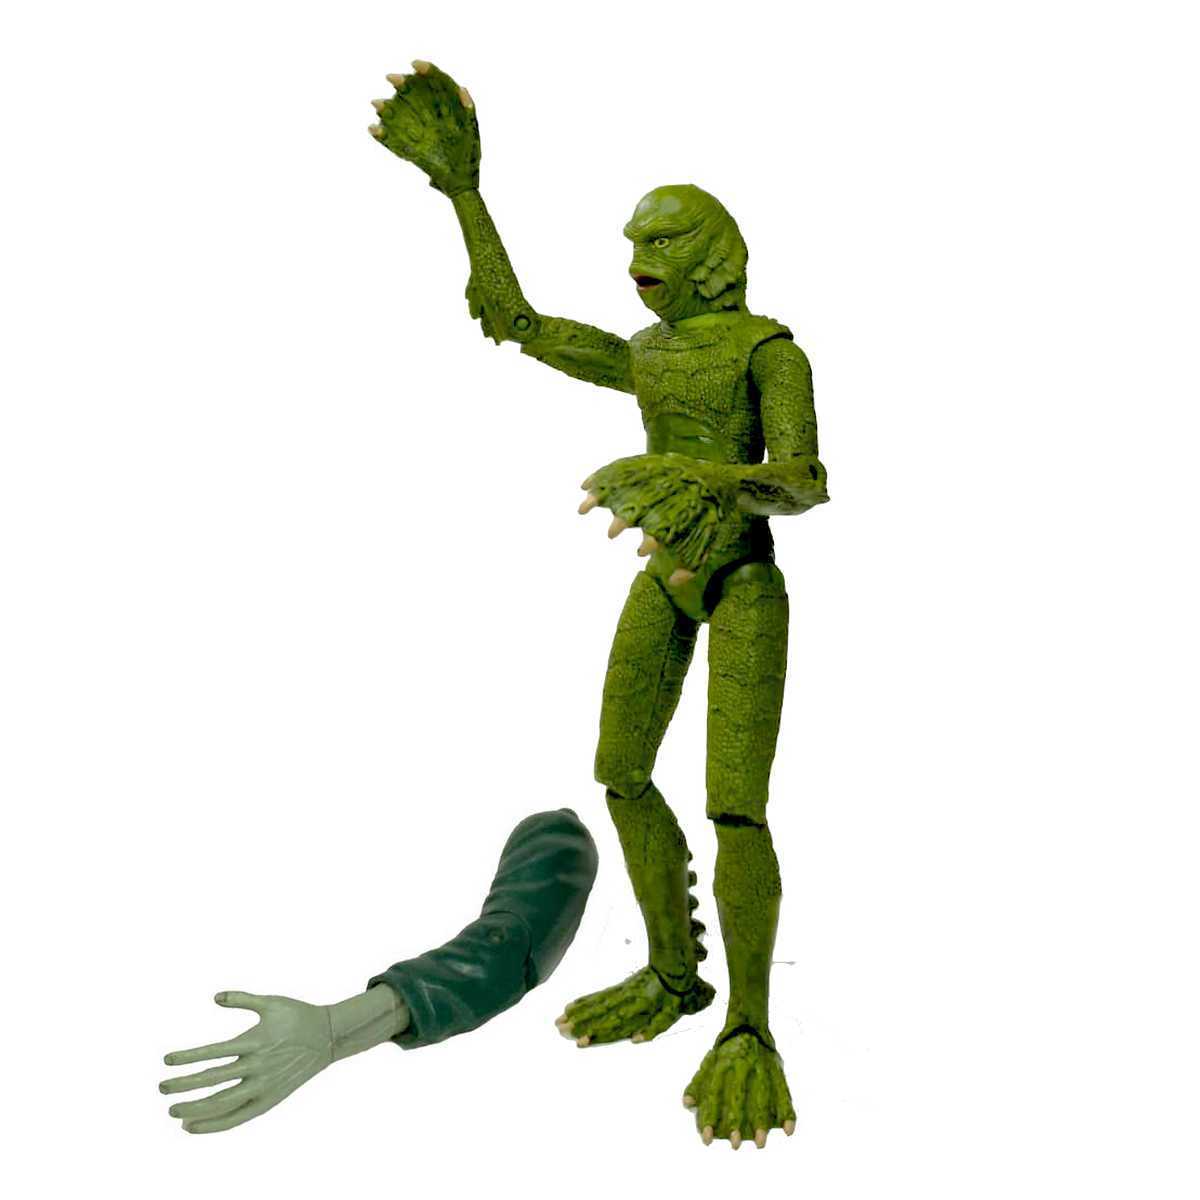 Toy Island Creature from the Black Lagoon Universal Monsters (Aberto) SEM EMBALAGEM